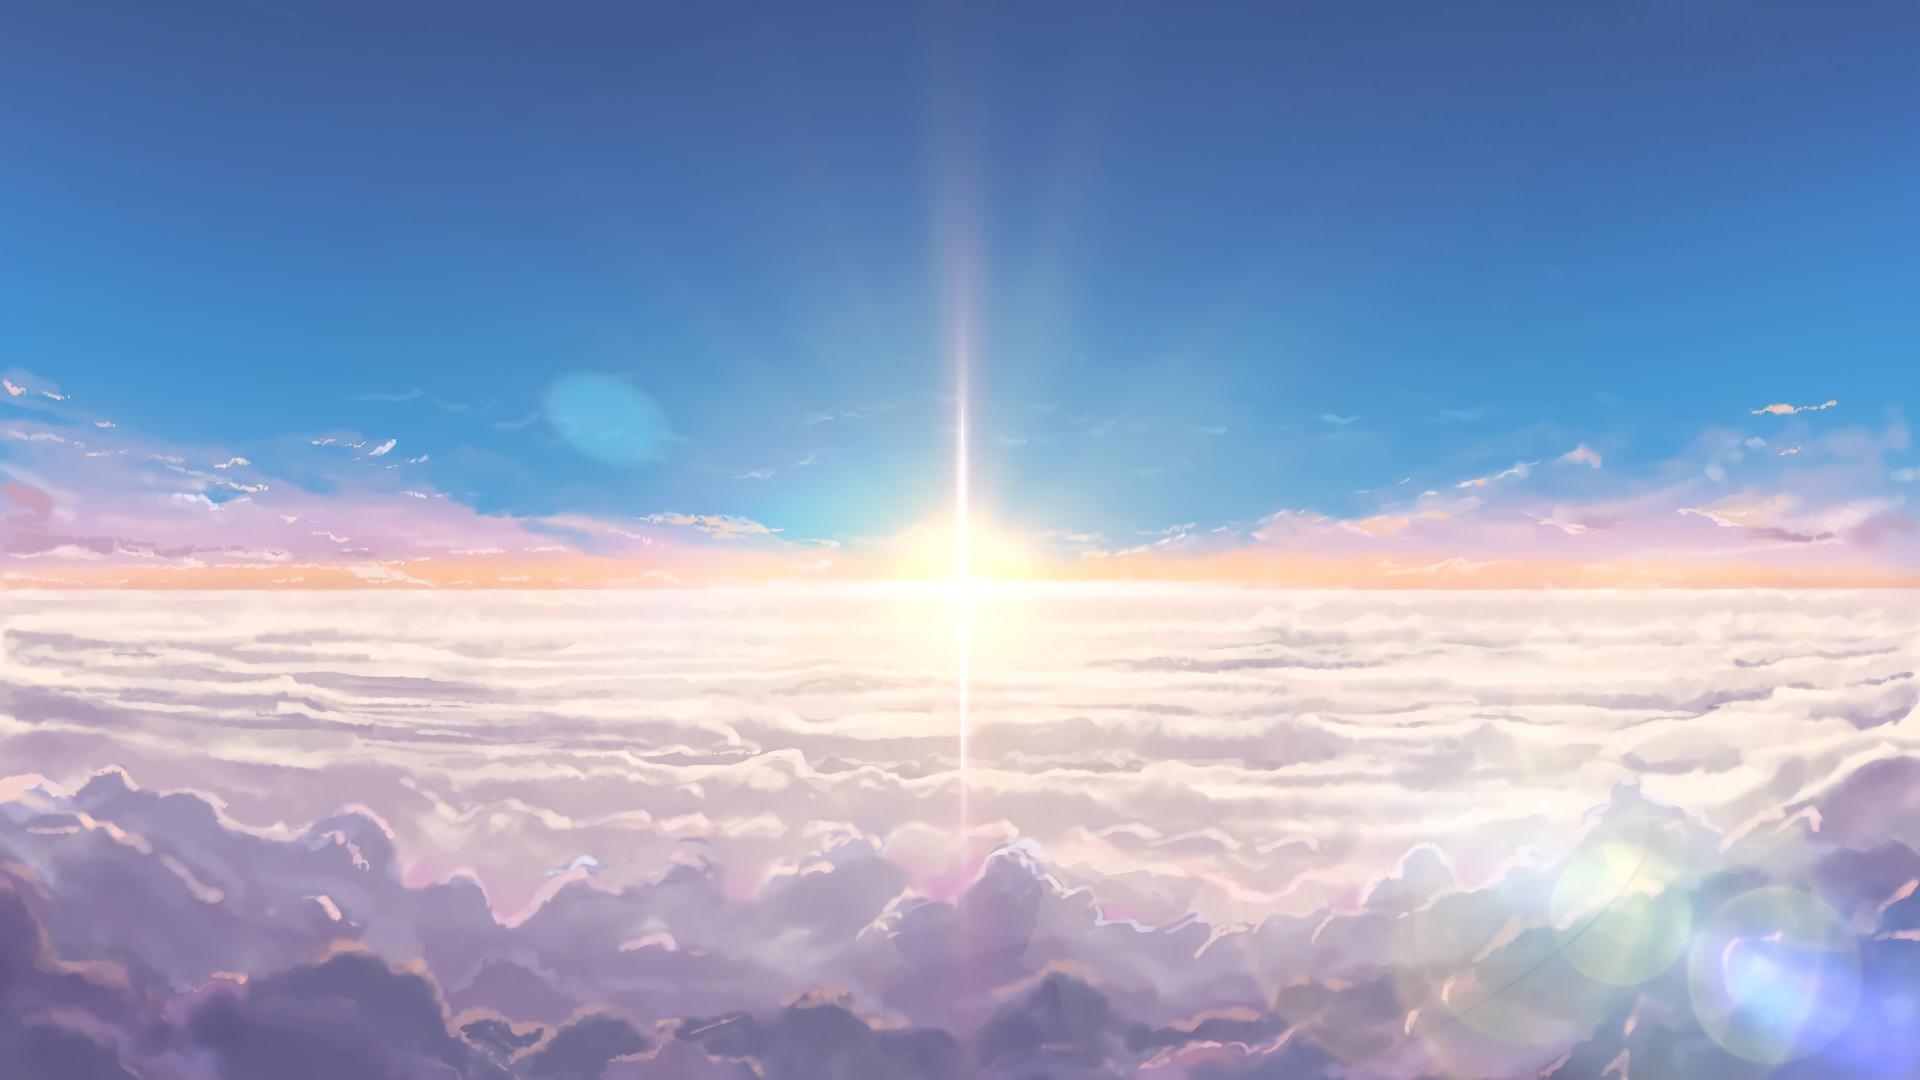 Formed by the reflection of anime clouds and lights in blue hues 2K  wallpaper download